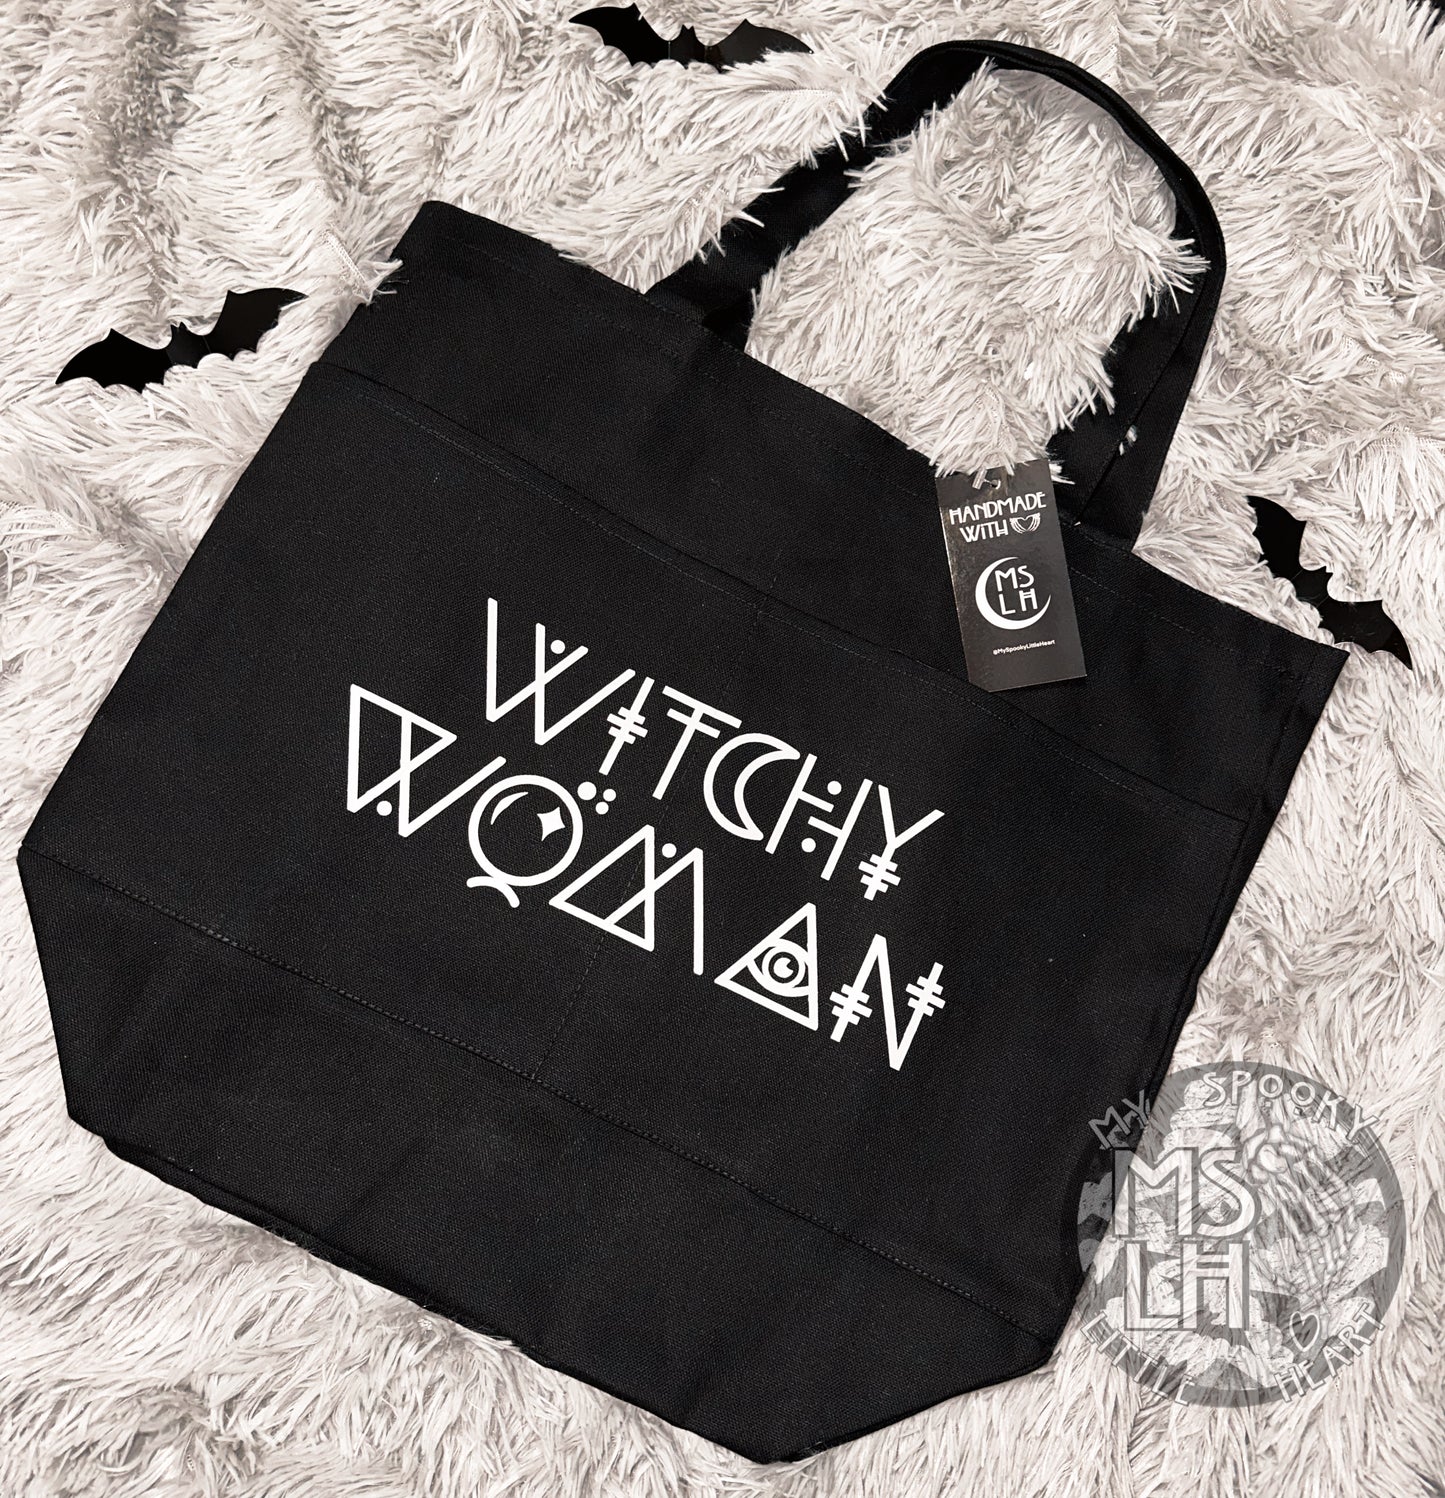 Witchy Woman Tote Bag